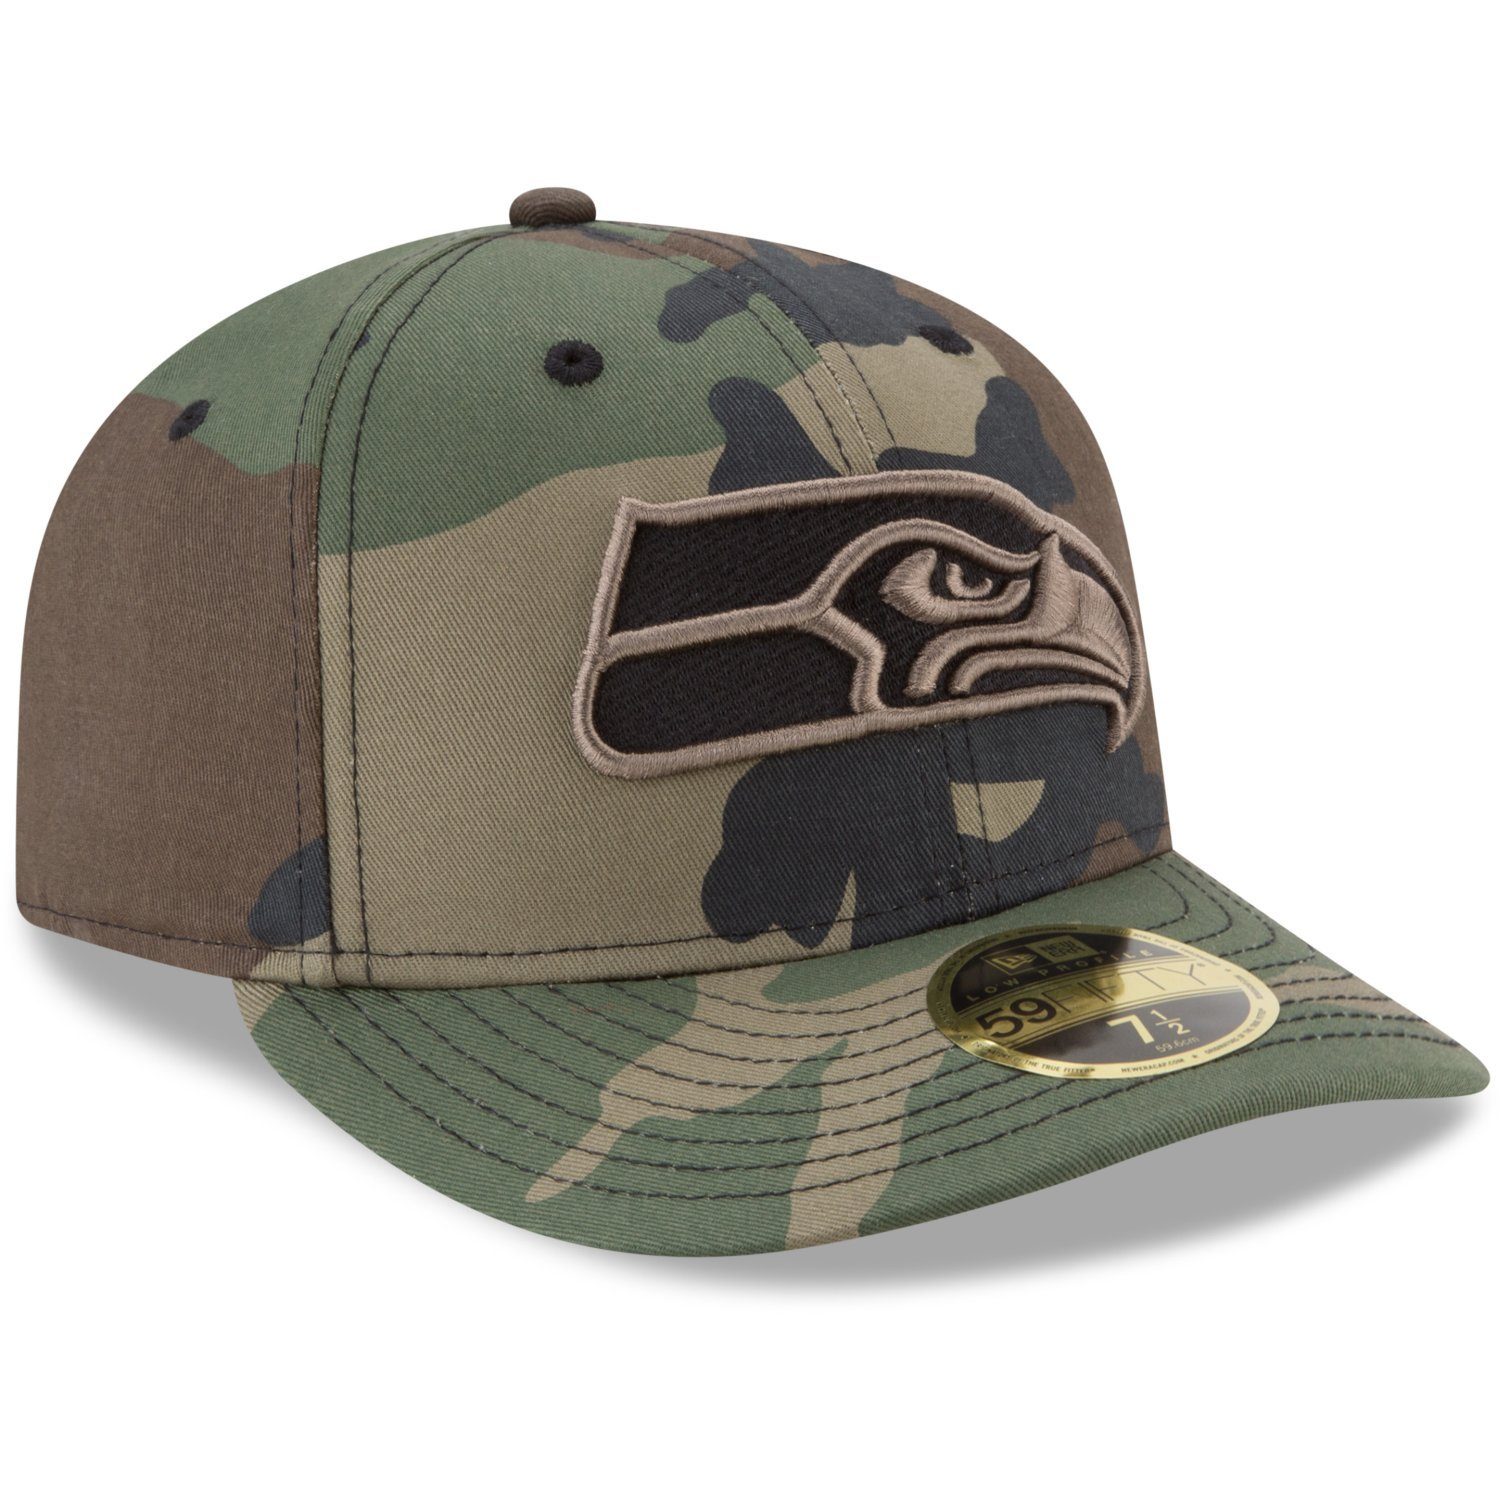 New Era Fitted Cap Seattle Teams Seahawks NFL 59Fifty Profile woodland Low